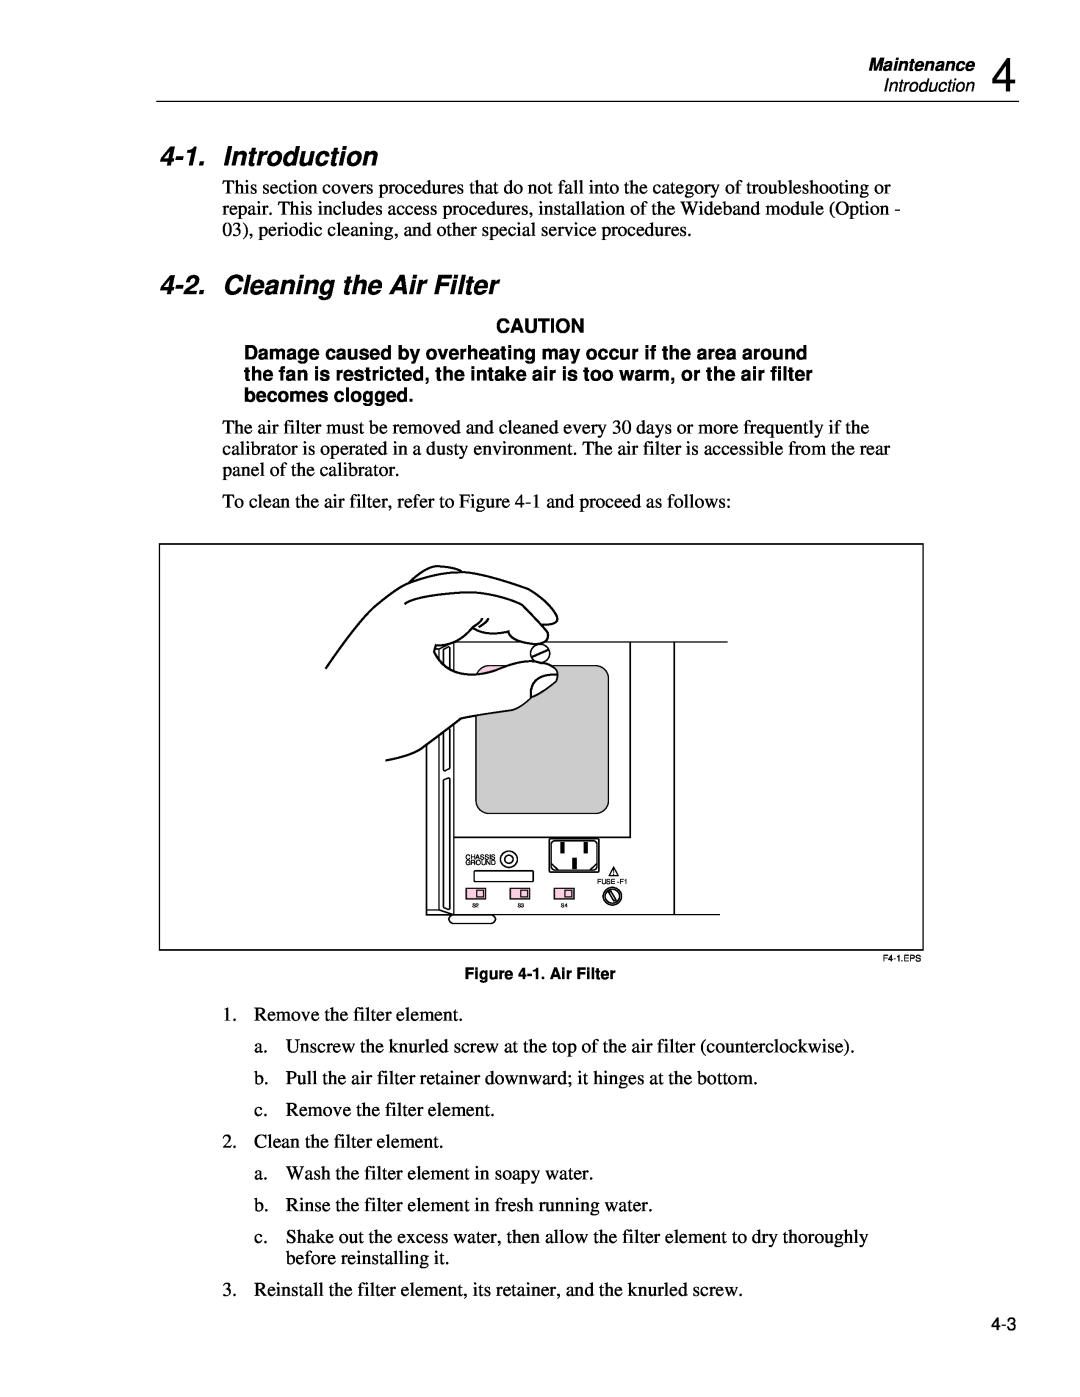 Fluke 5720A service manual Introduction, Cleaning the Air Filter 